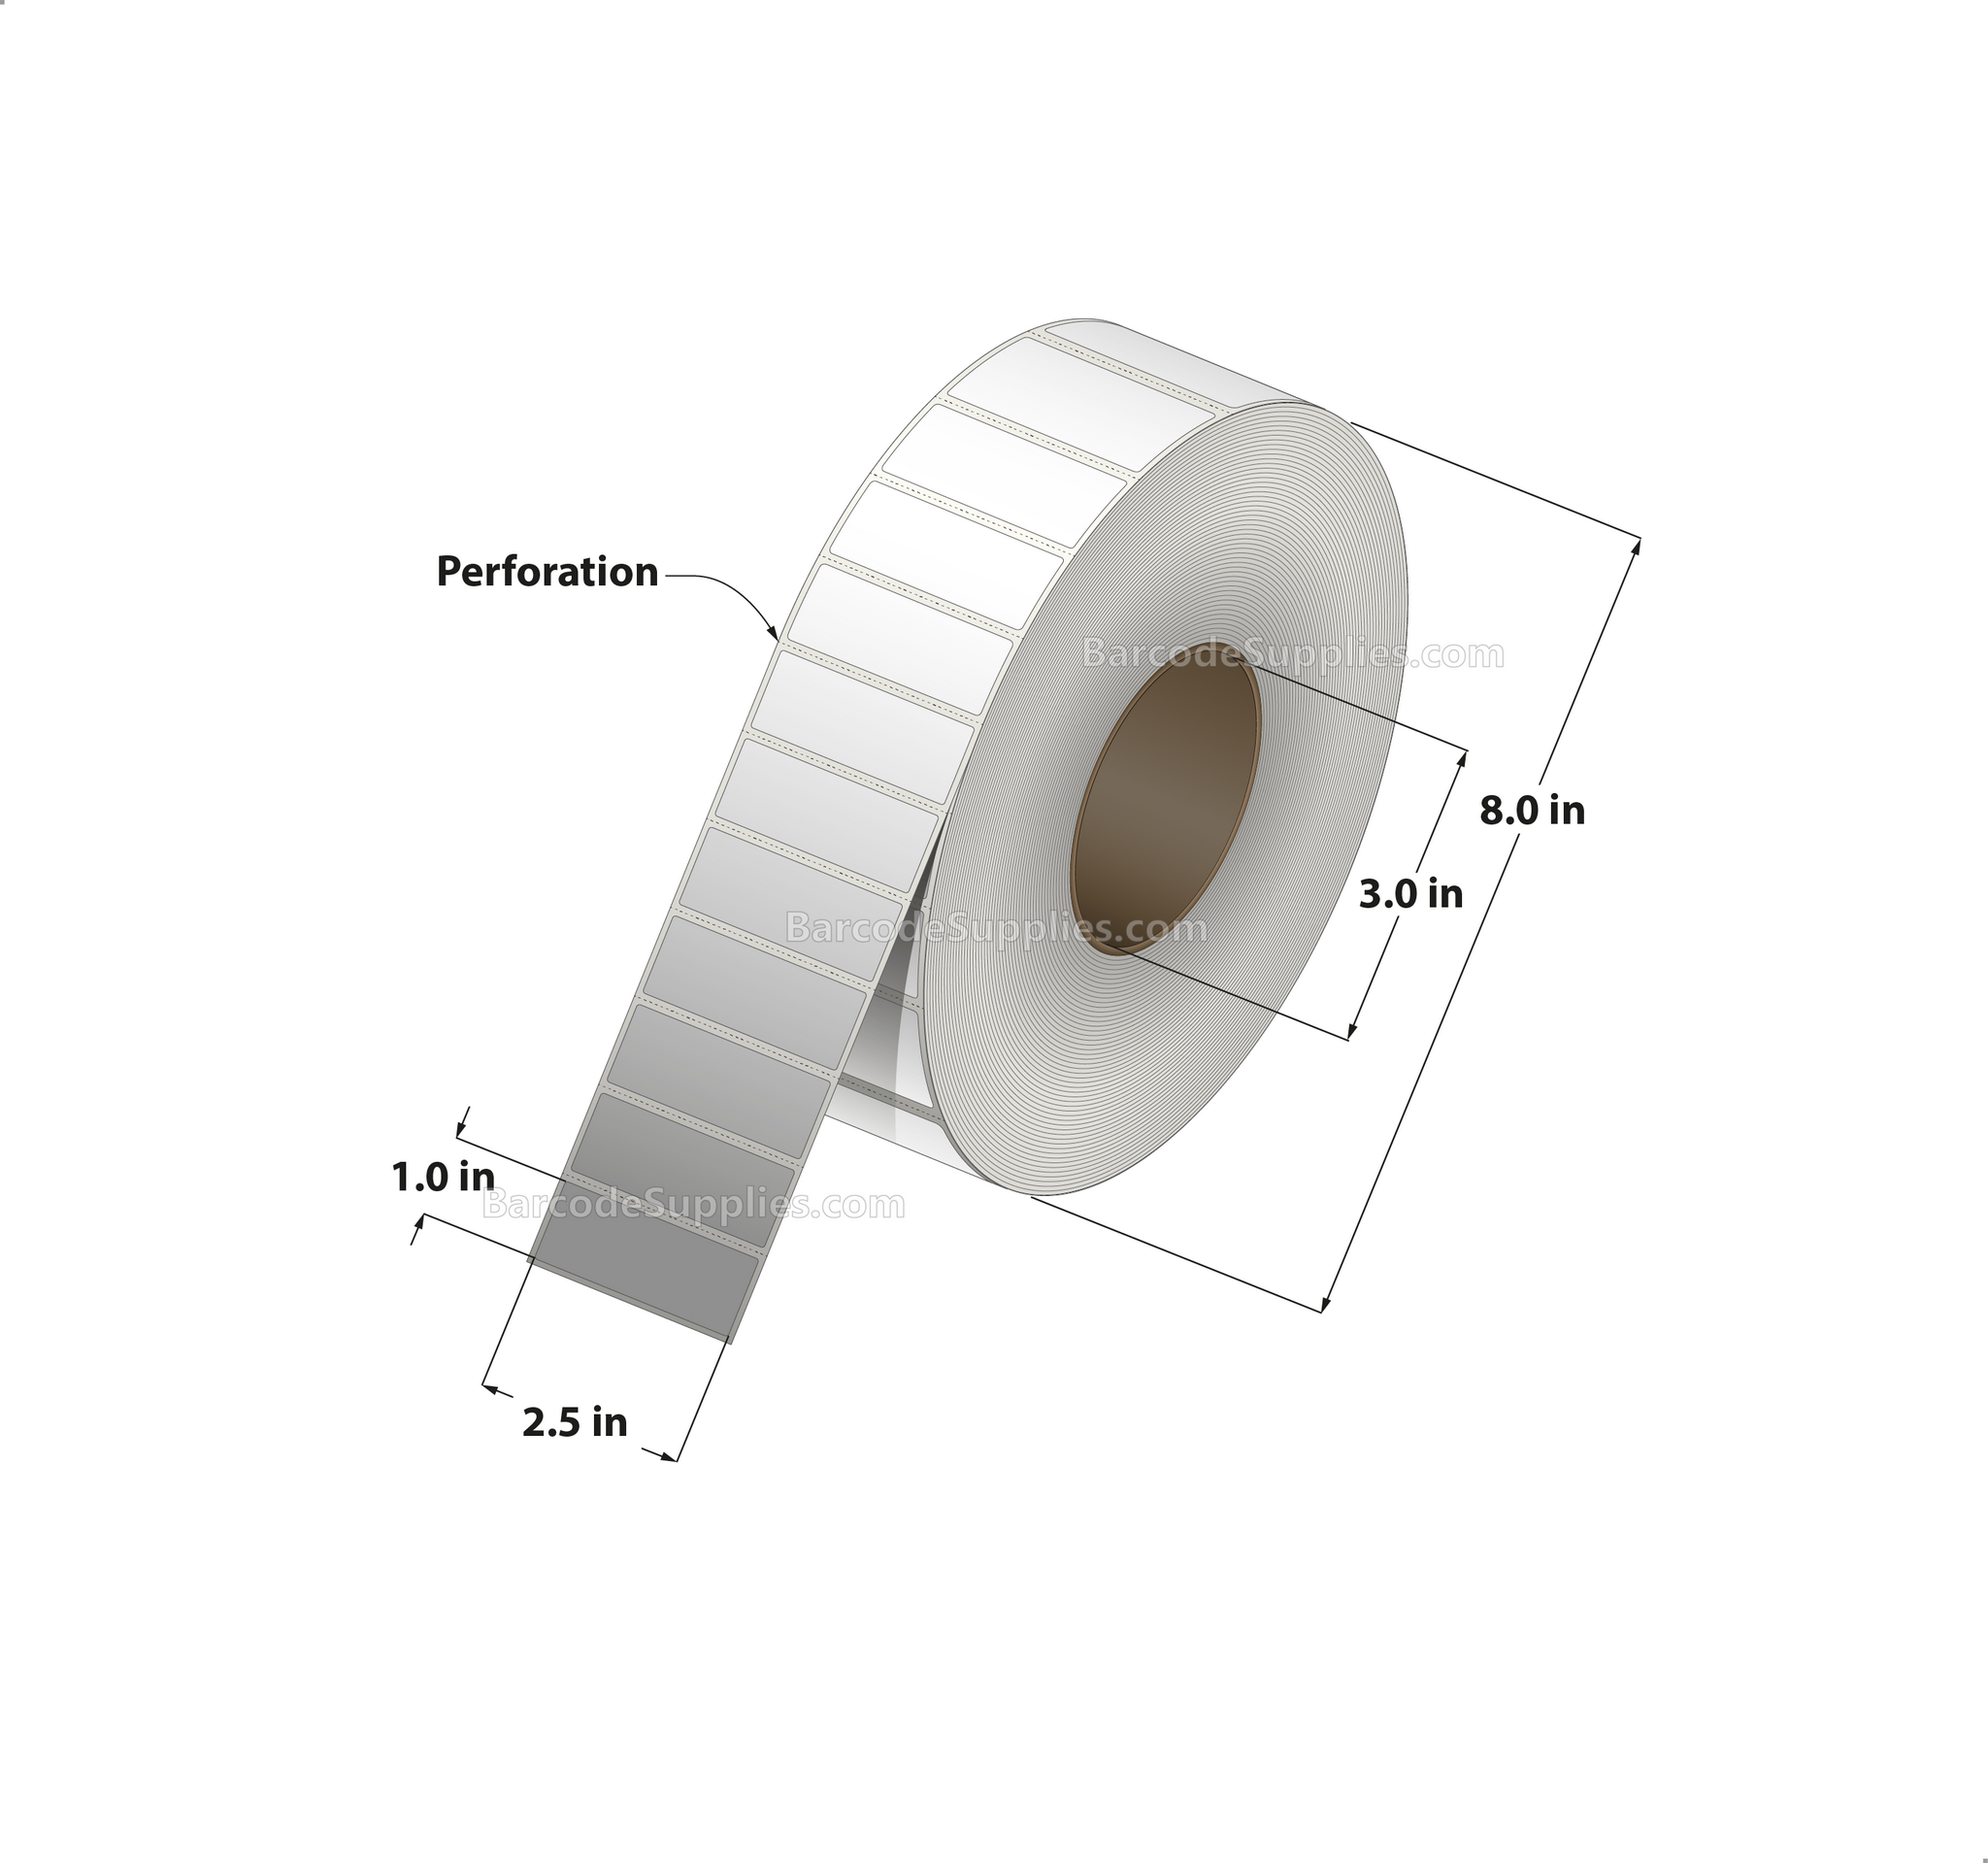 2.5 x 1 Thermal Transfer White Labels With Permanent Adhesive - Perforated - 5500 Labels Per Roll - Carton Of 8 Rolls - 44000 Labels Total - MPN: RT-25-1-5500-3